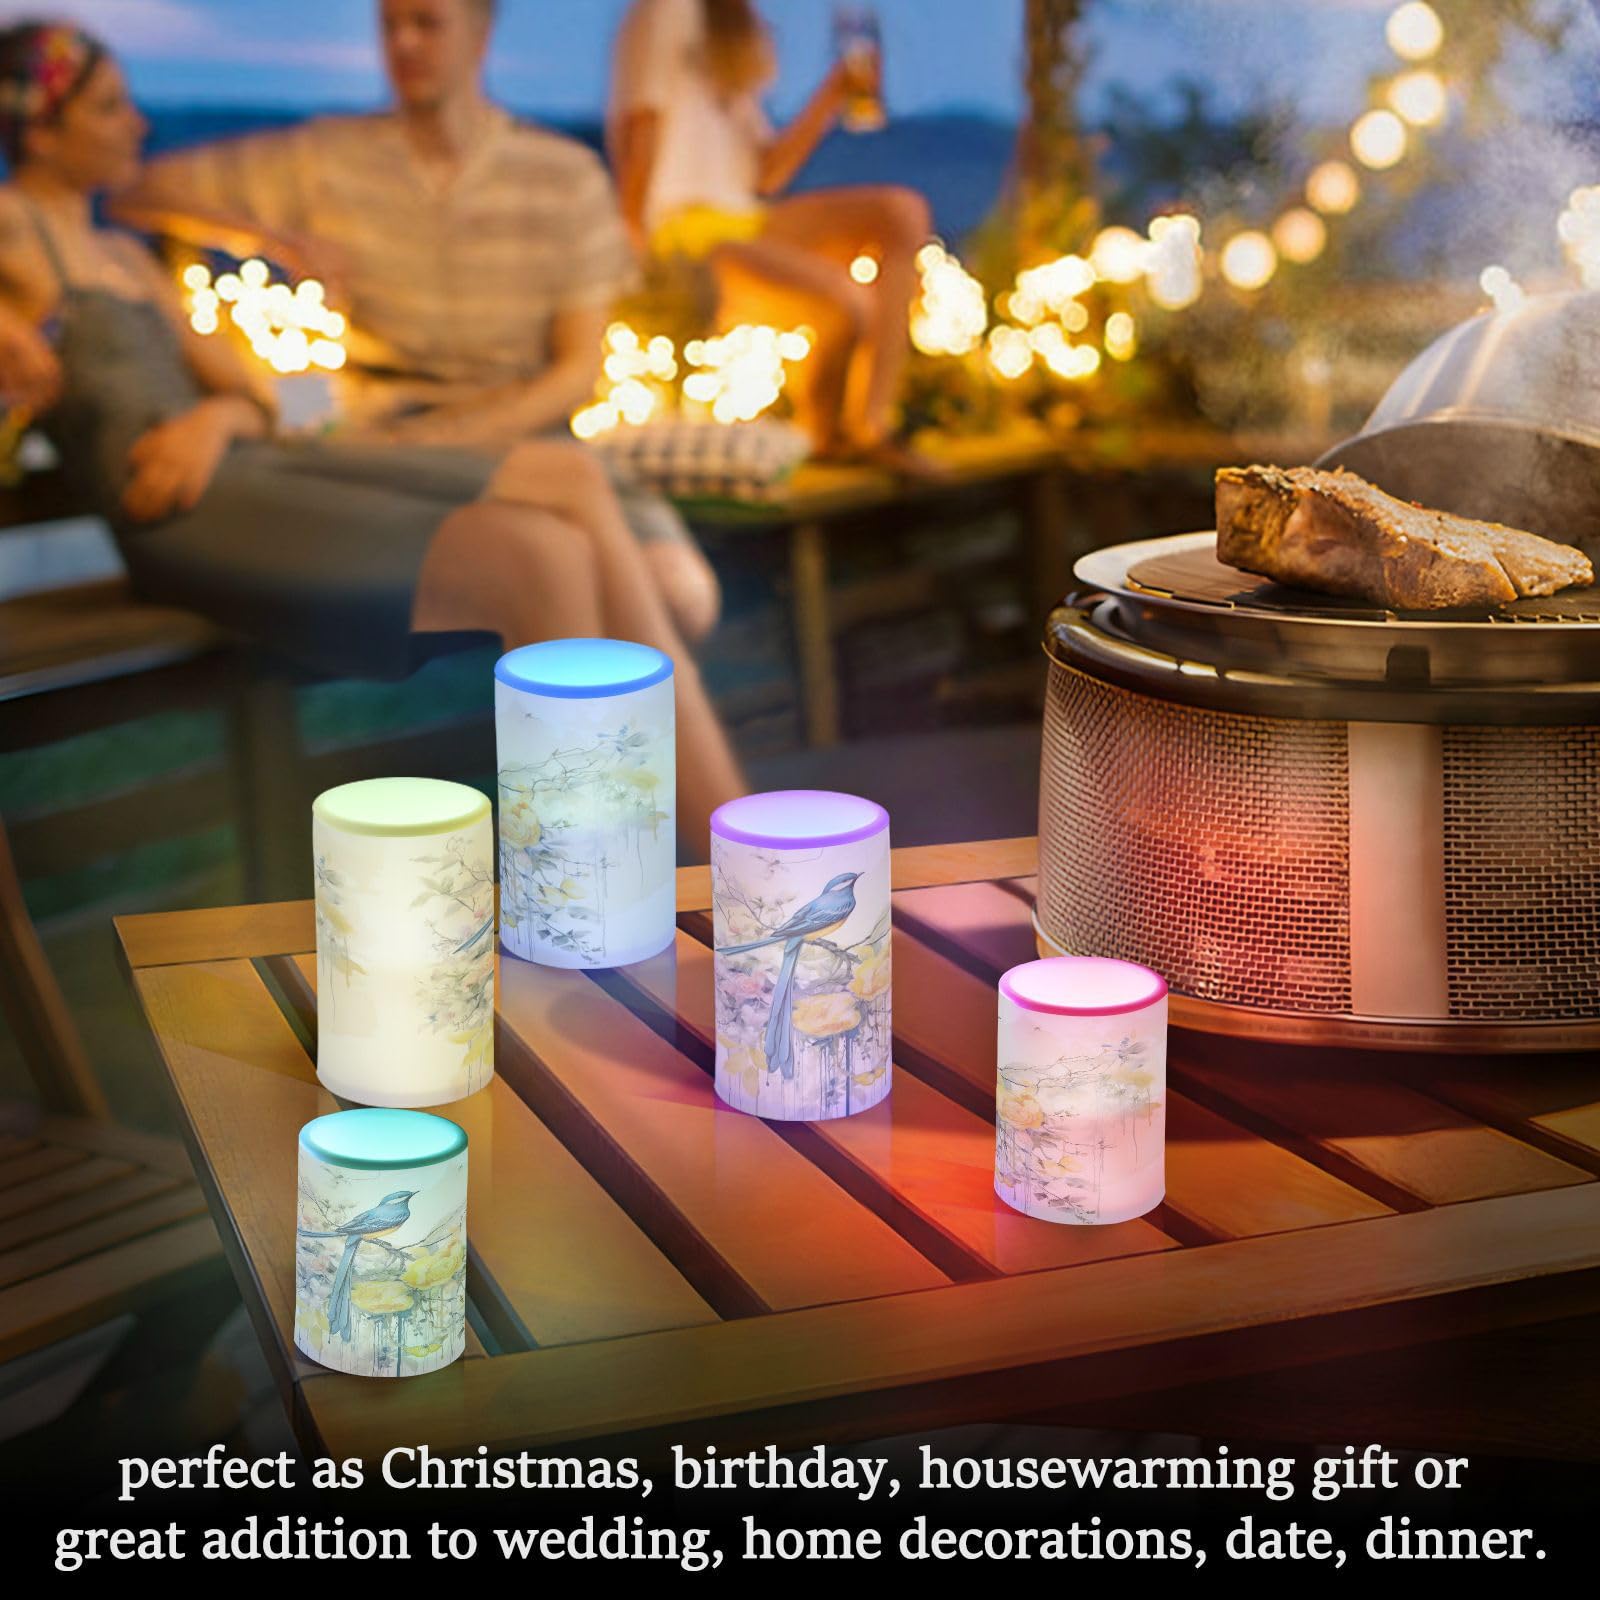 Spring Blue Bird with Yellow Flowers Butterflies Flickering Flameless Candles Battery Operated with Remote Timer,Tea Light Candles LED Pillar Votive Candles set of 2 for Outdoor Indoor Decorations